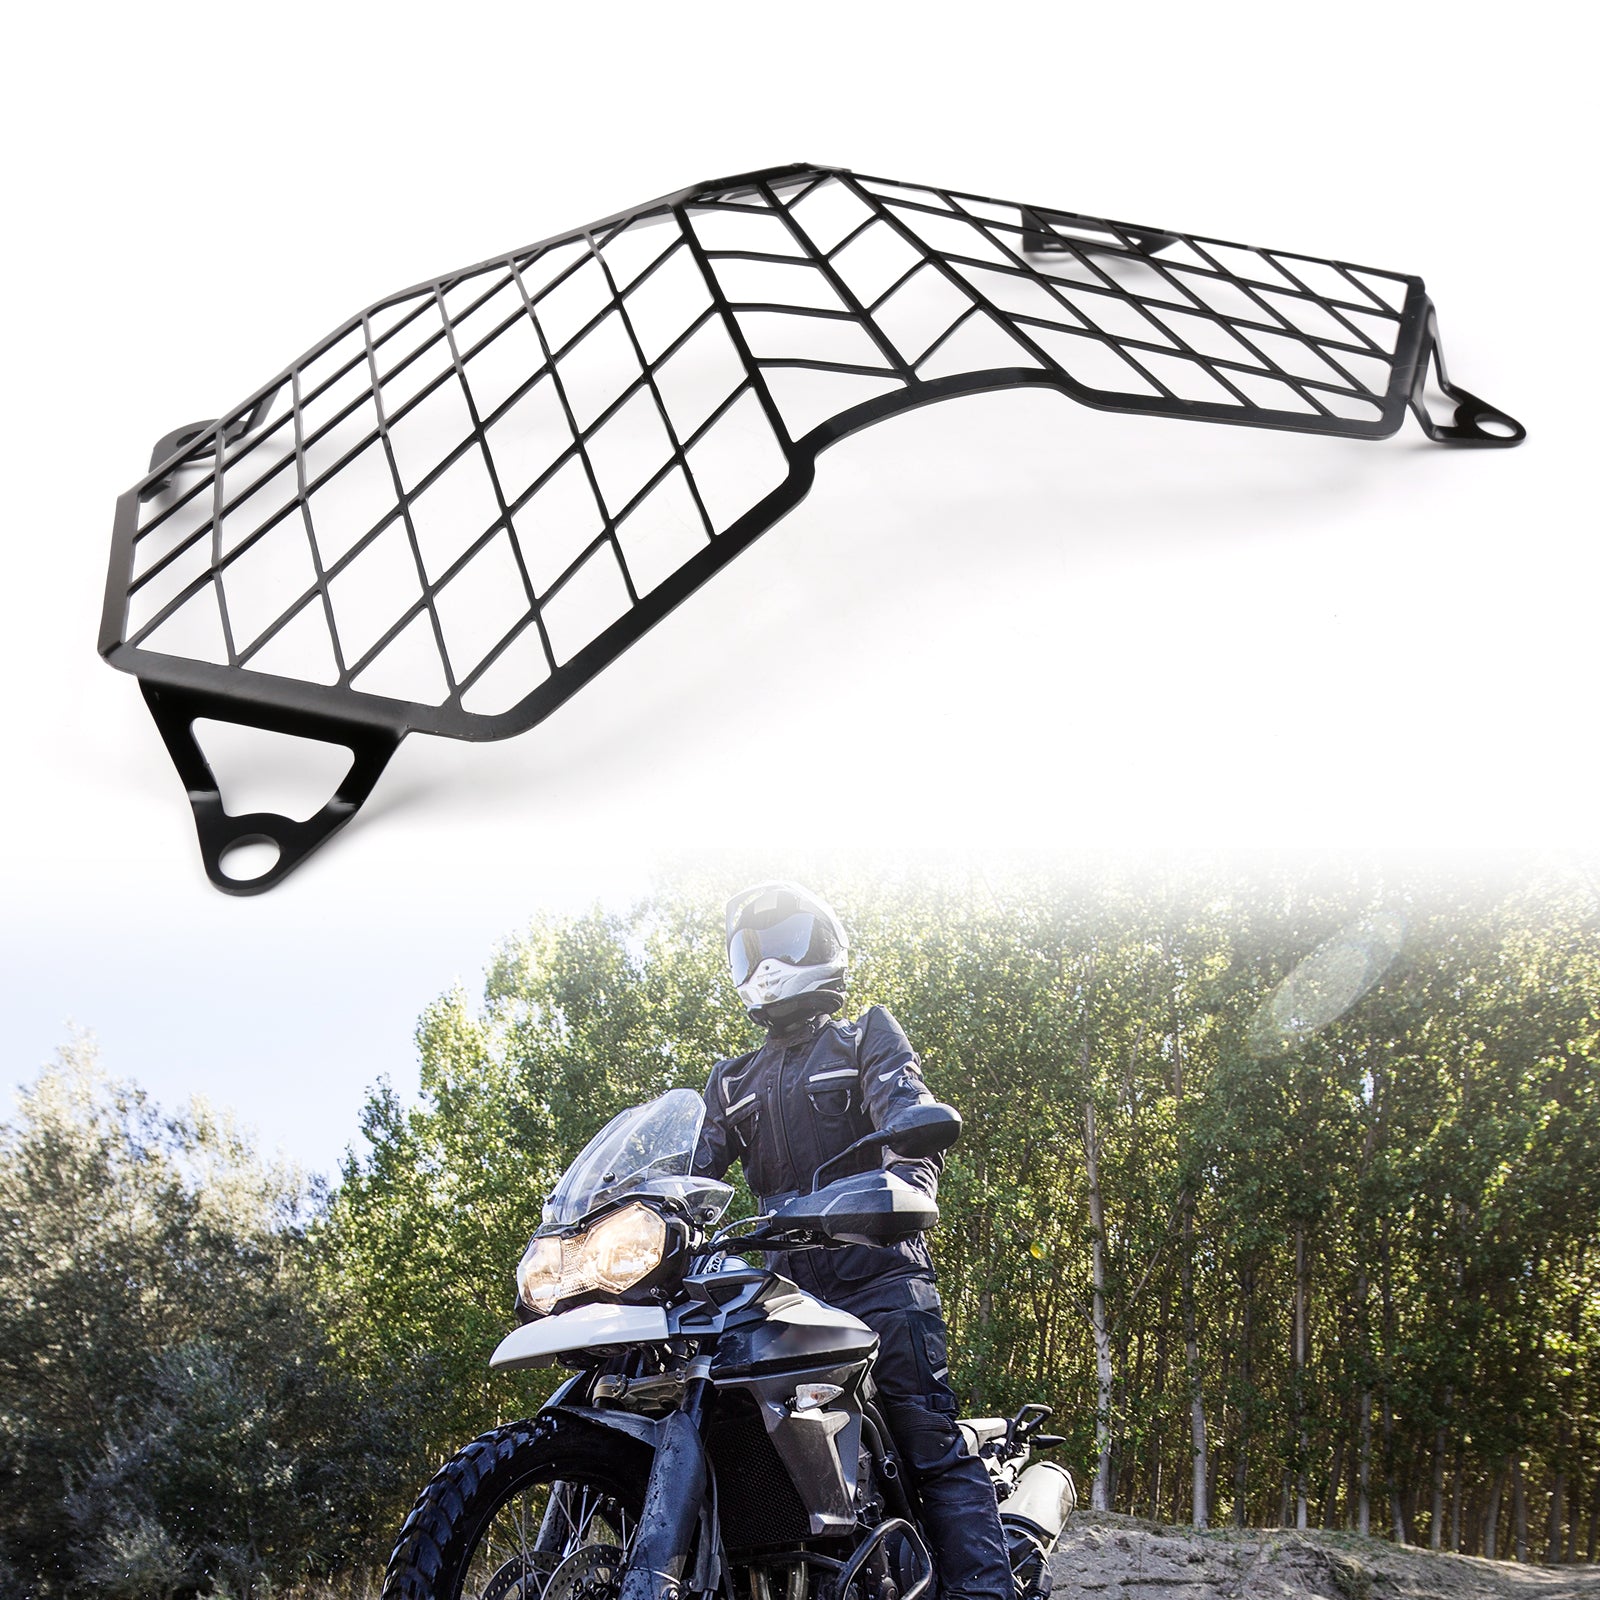 Headlight Guard Protector Grill Cover For EXPLORER 1200 12-17 Tiger 800 10-17